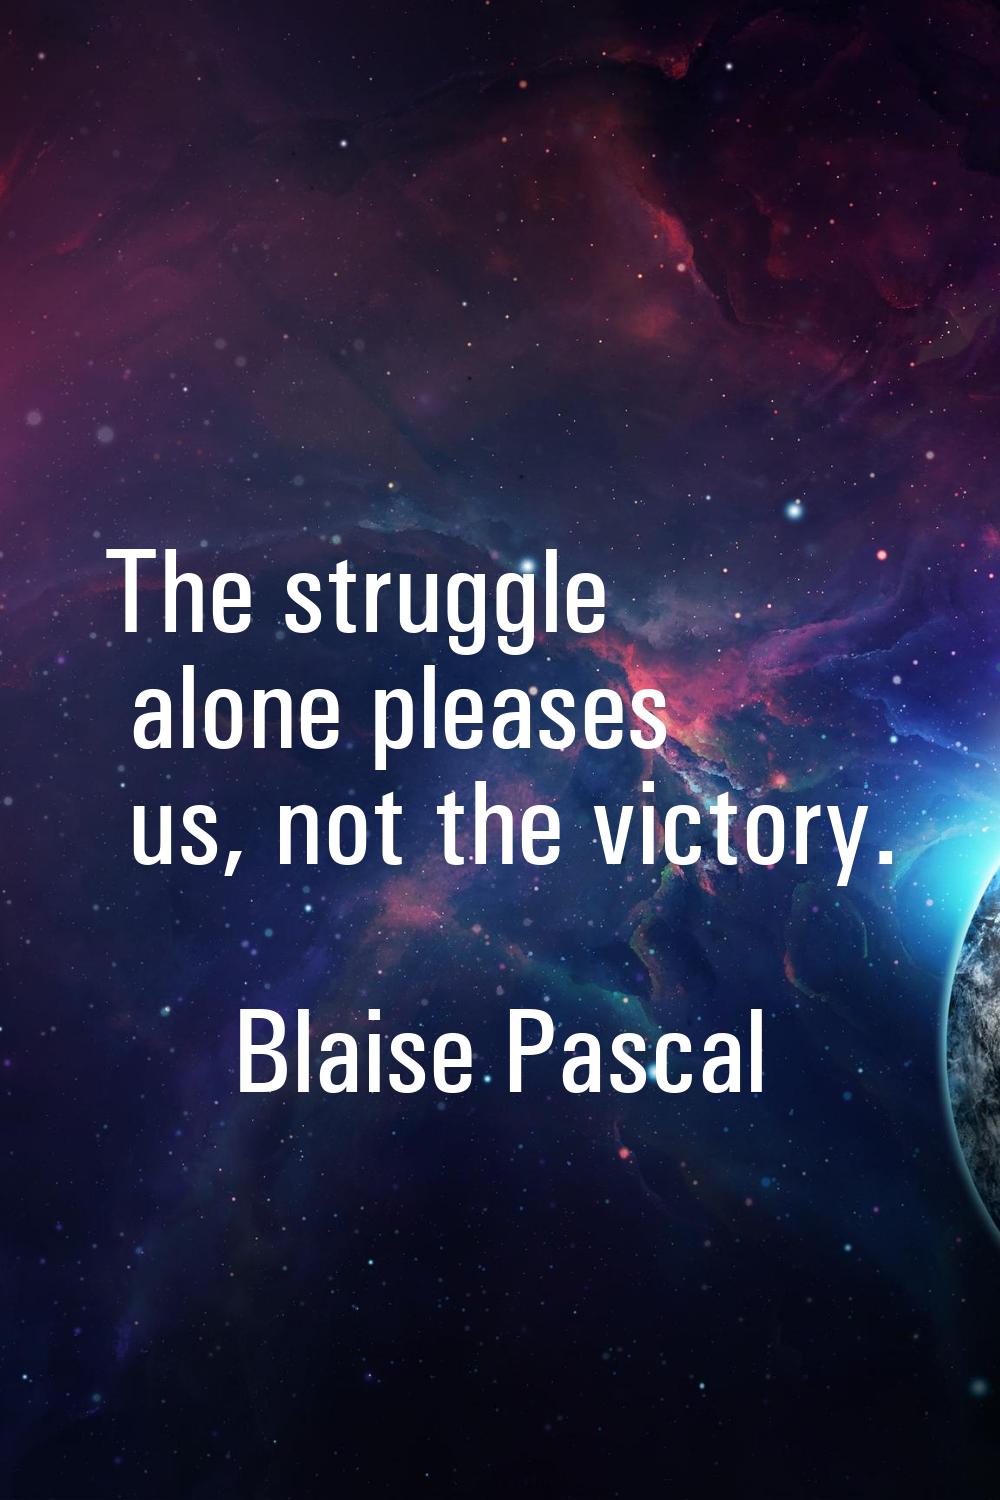 The struggle alone pleases us, not the victory.